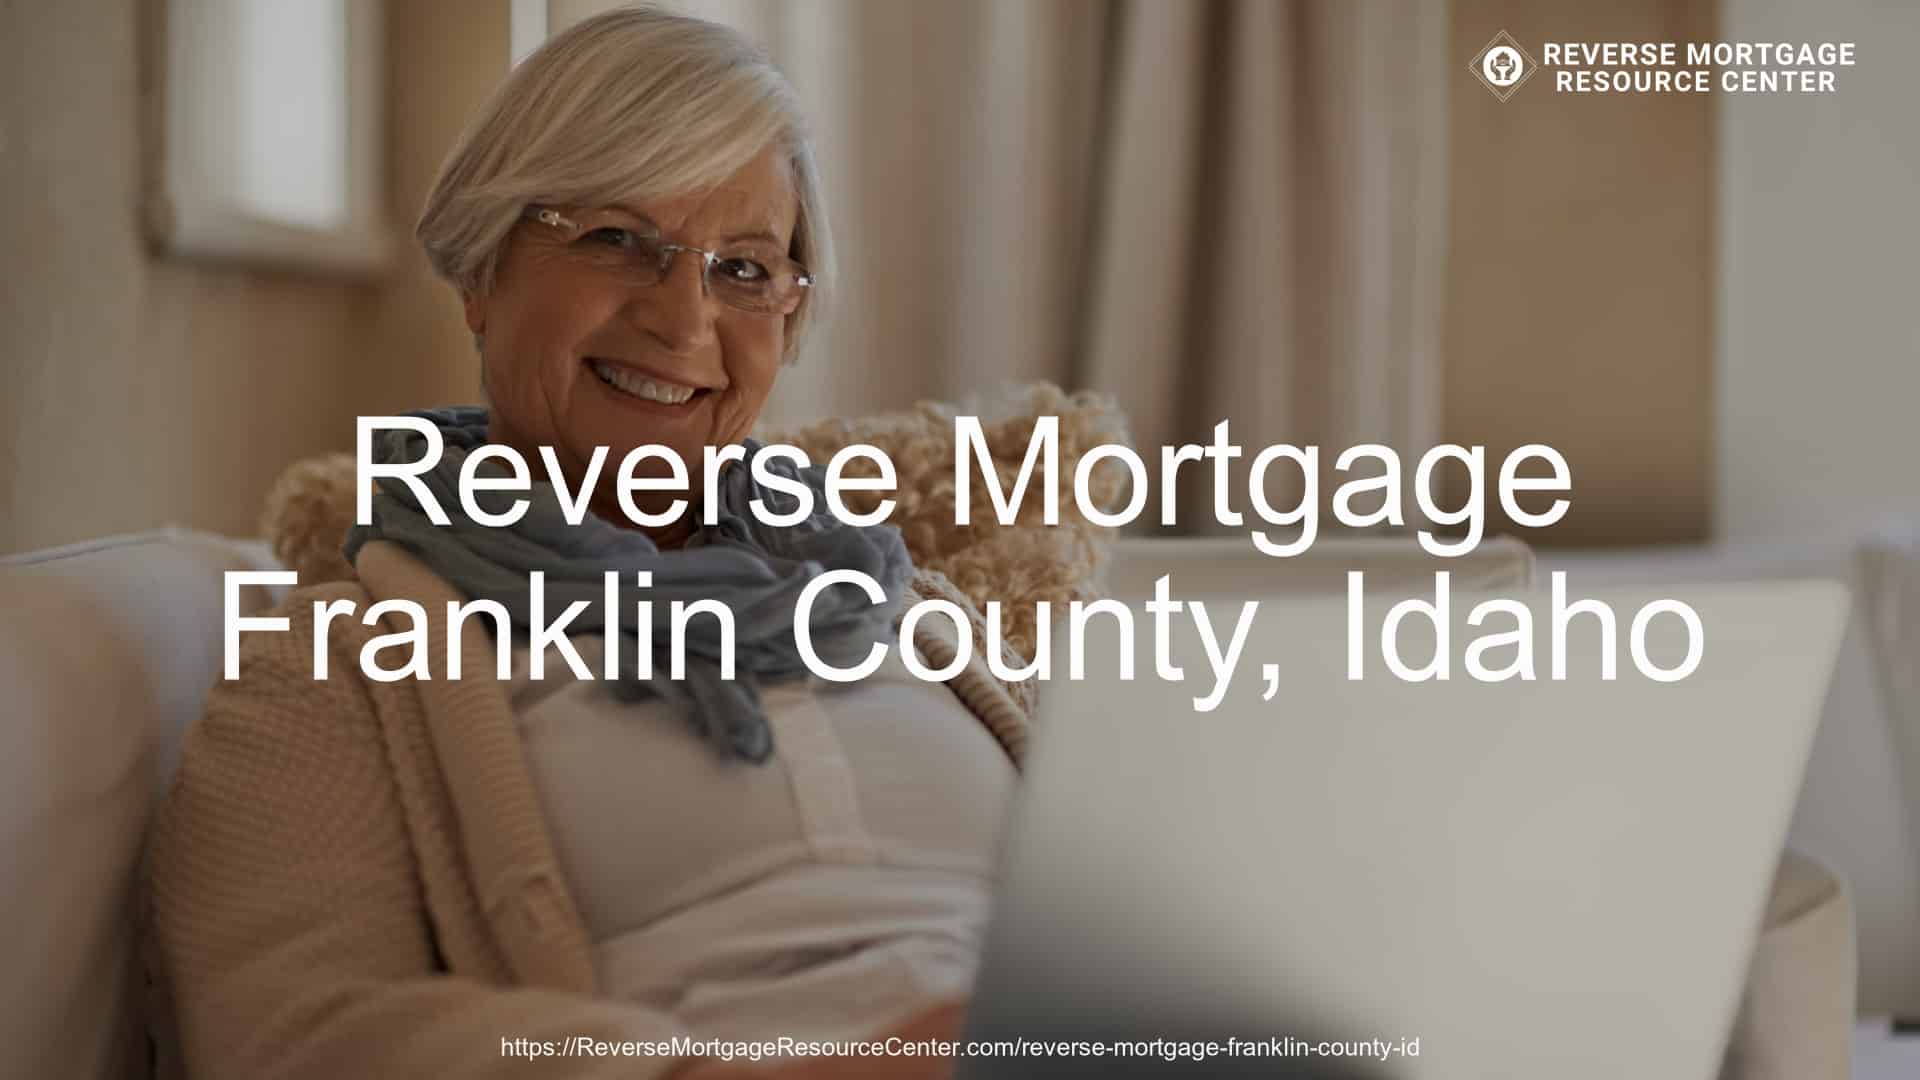 Reverse Mortgage Loans in Franklin County Idaho